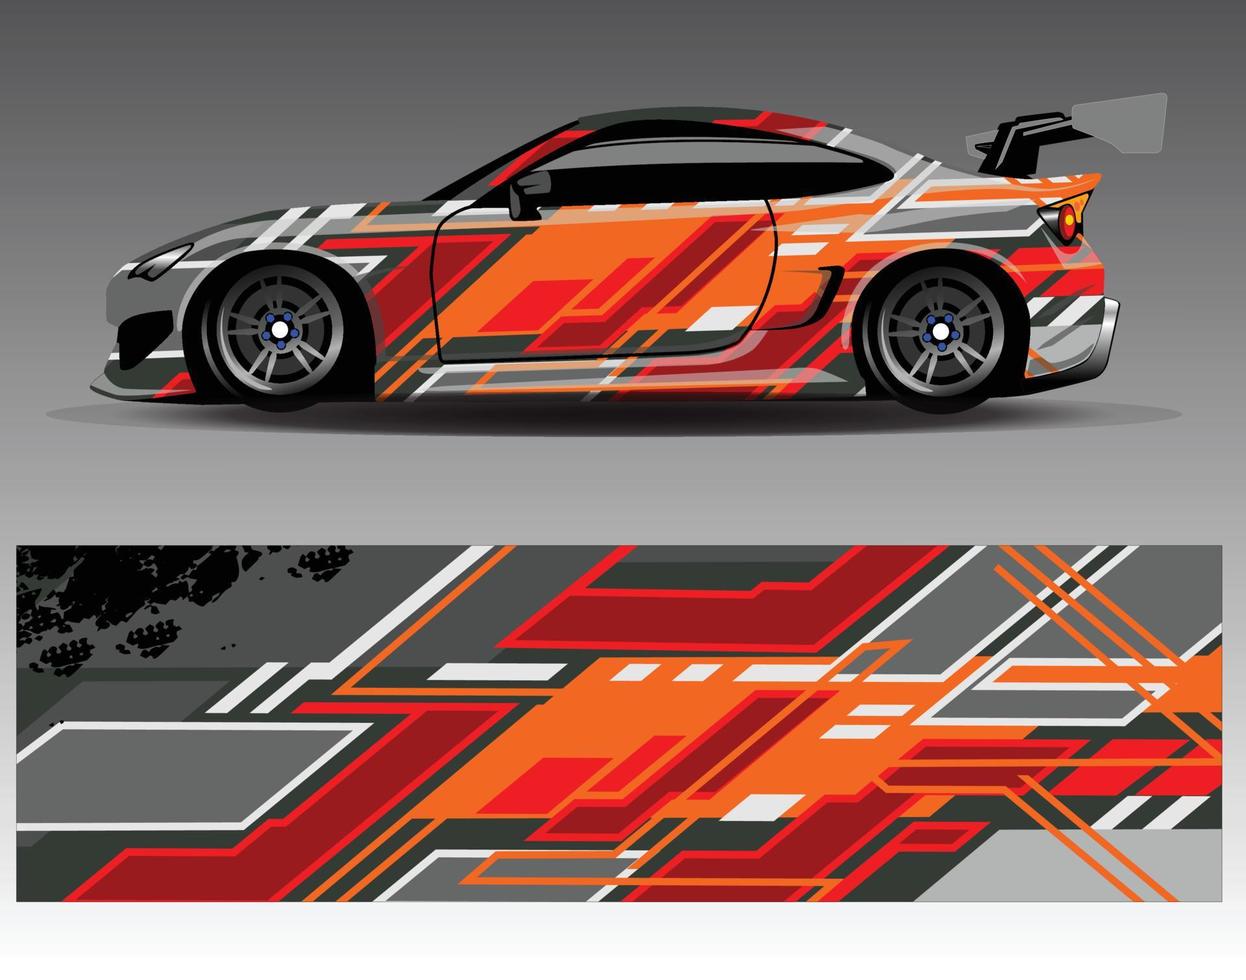 Graphic abstract stripe racing background kit designs for wrap vehicle race car rally adventure vector